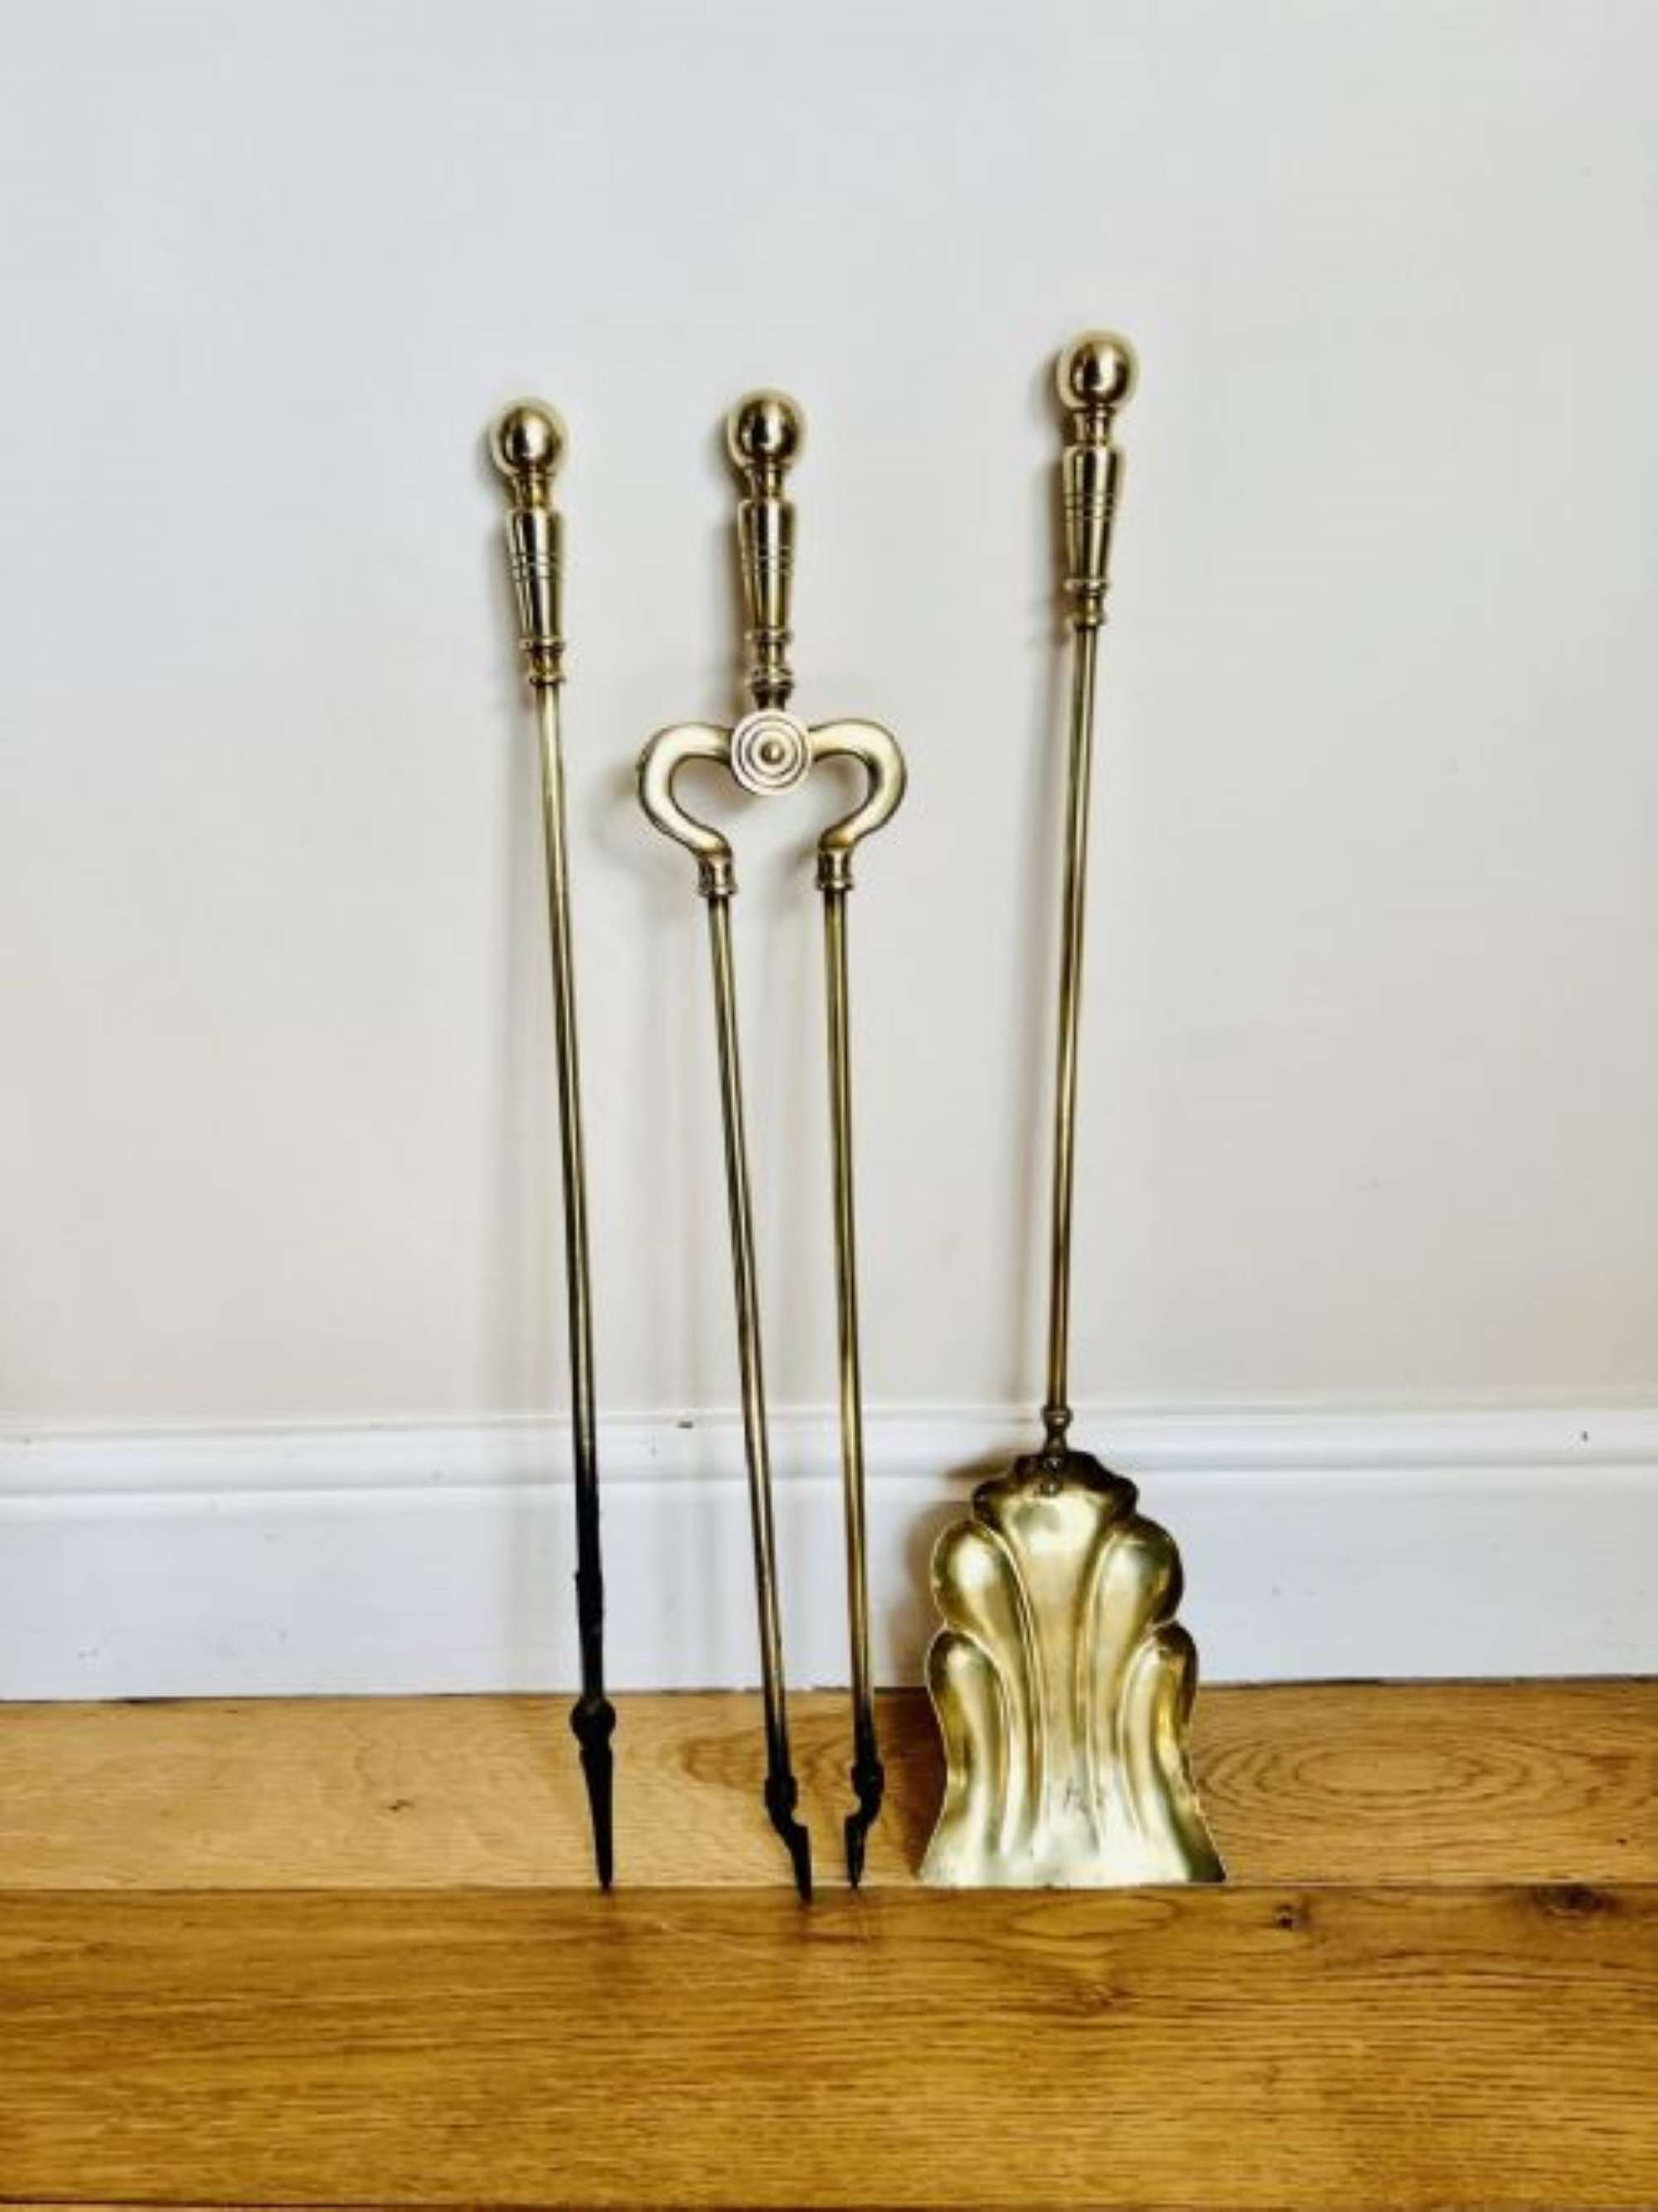 Antique Victorian quality brass fire irons